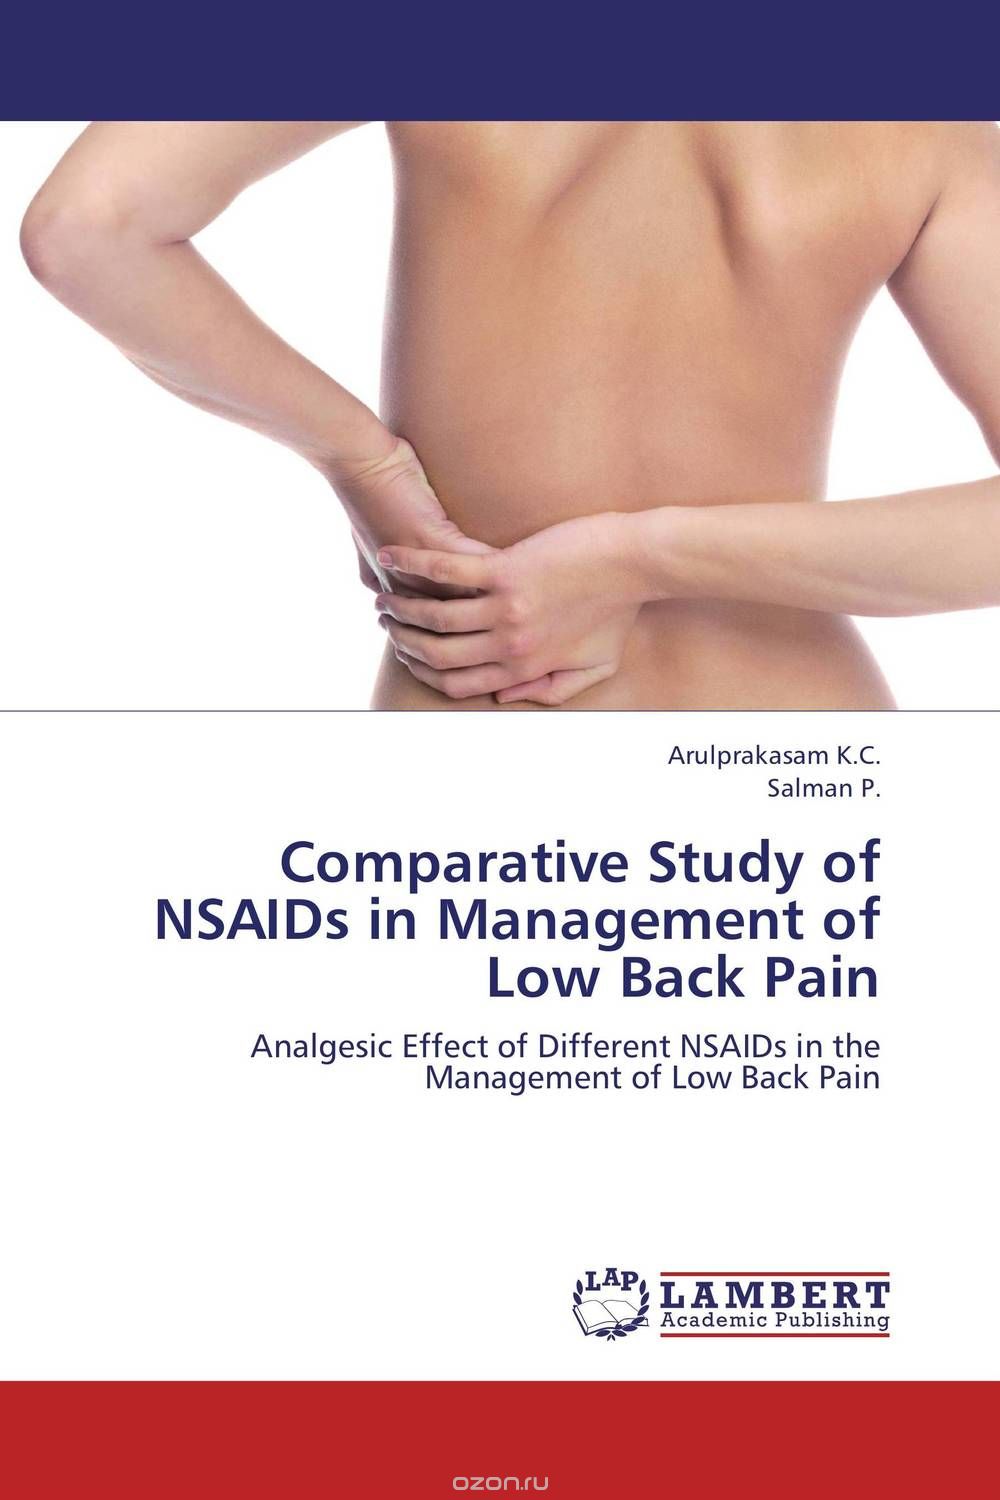 Скачать книгу "Comparative Study of NSAIDs in Management of Low Back Pain"